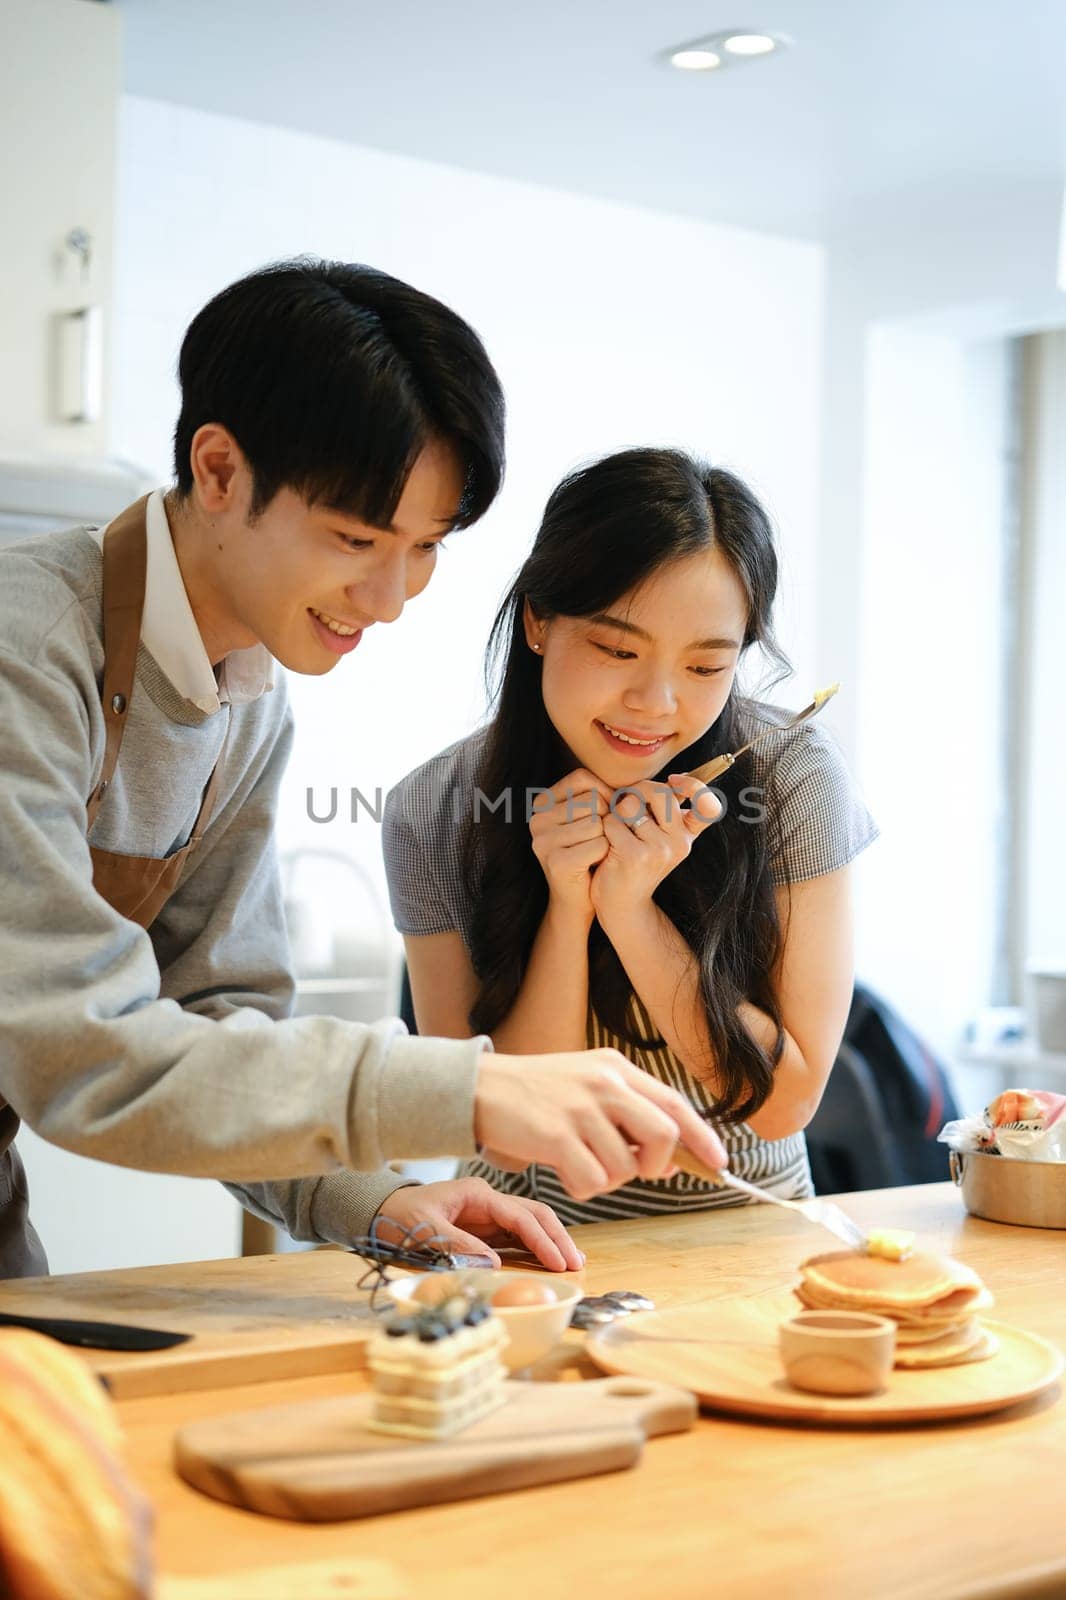 Smiling man putting butter on the hot pancakes, preparing breakfast for his girlfriend in cozy kitchen..